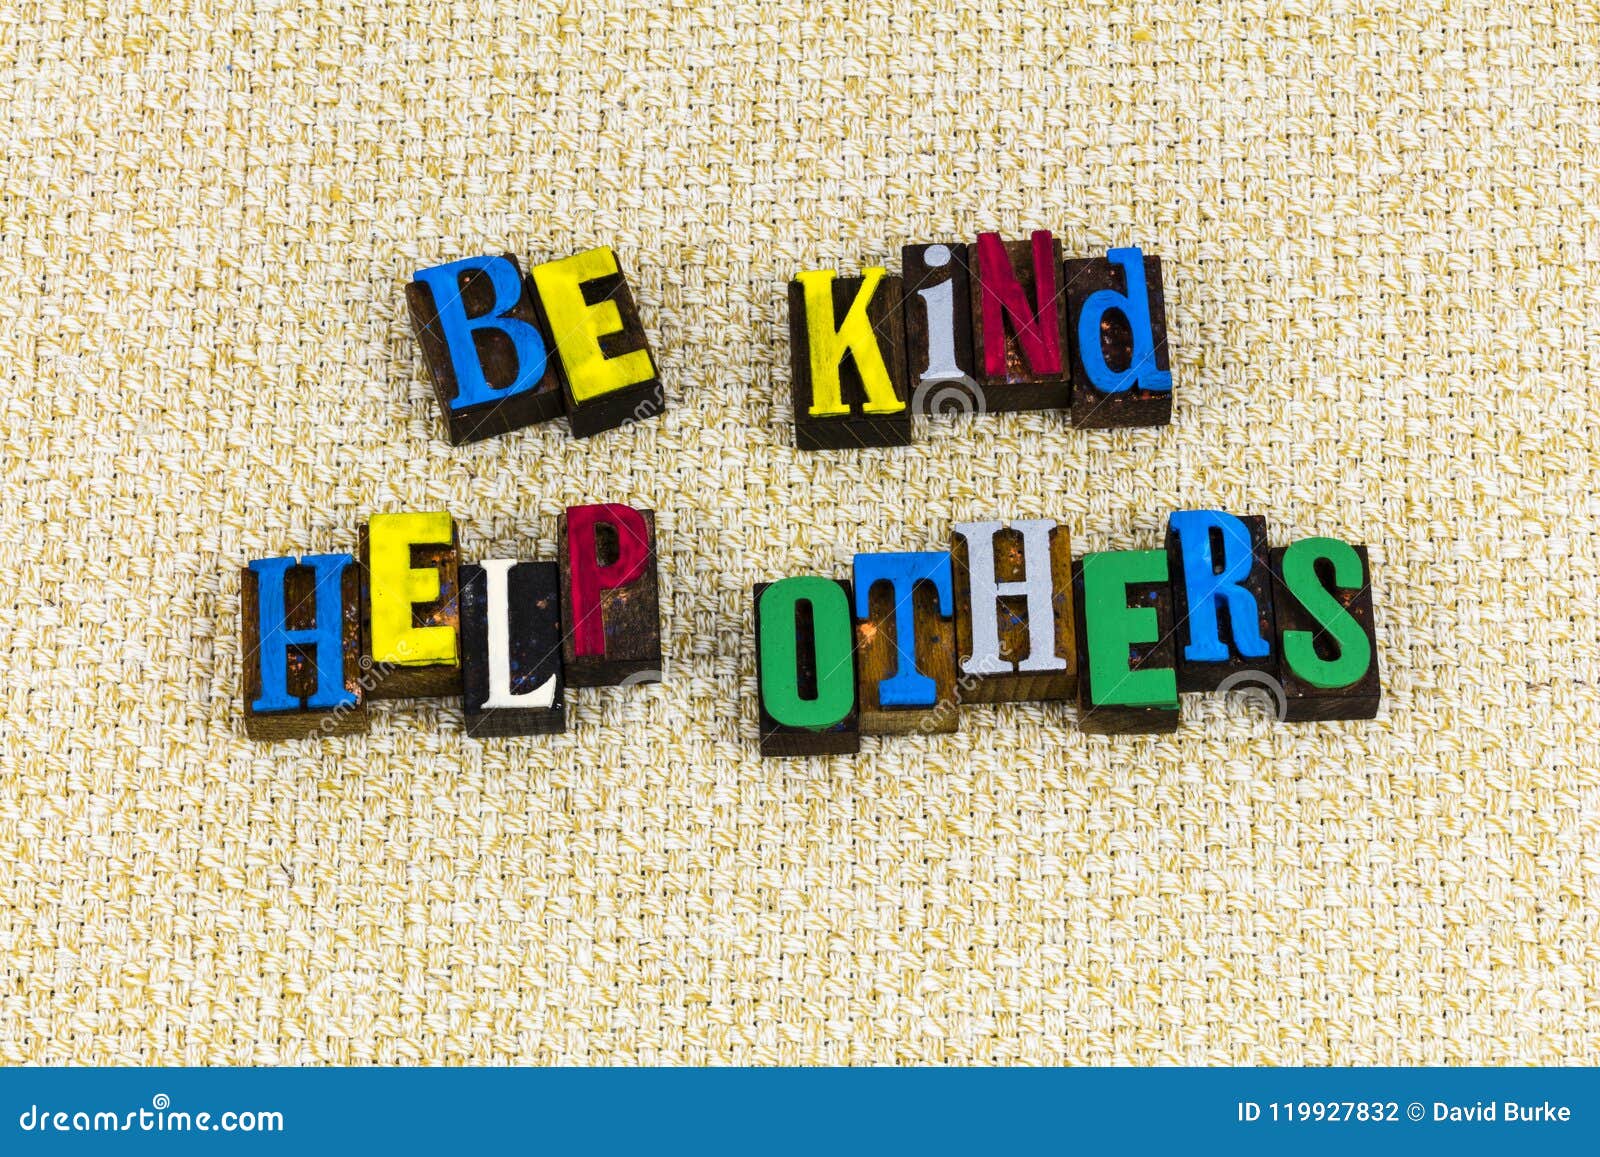 donation kind kindness help others helping people volunteer love